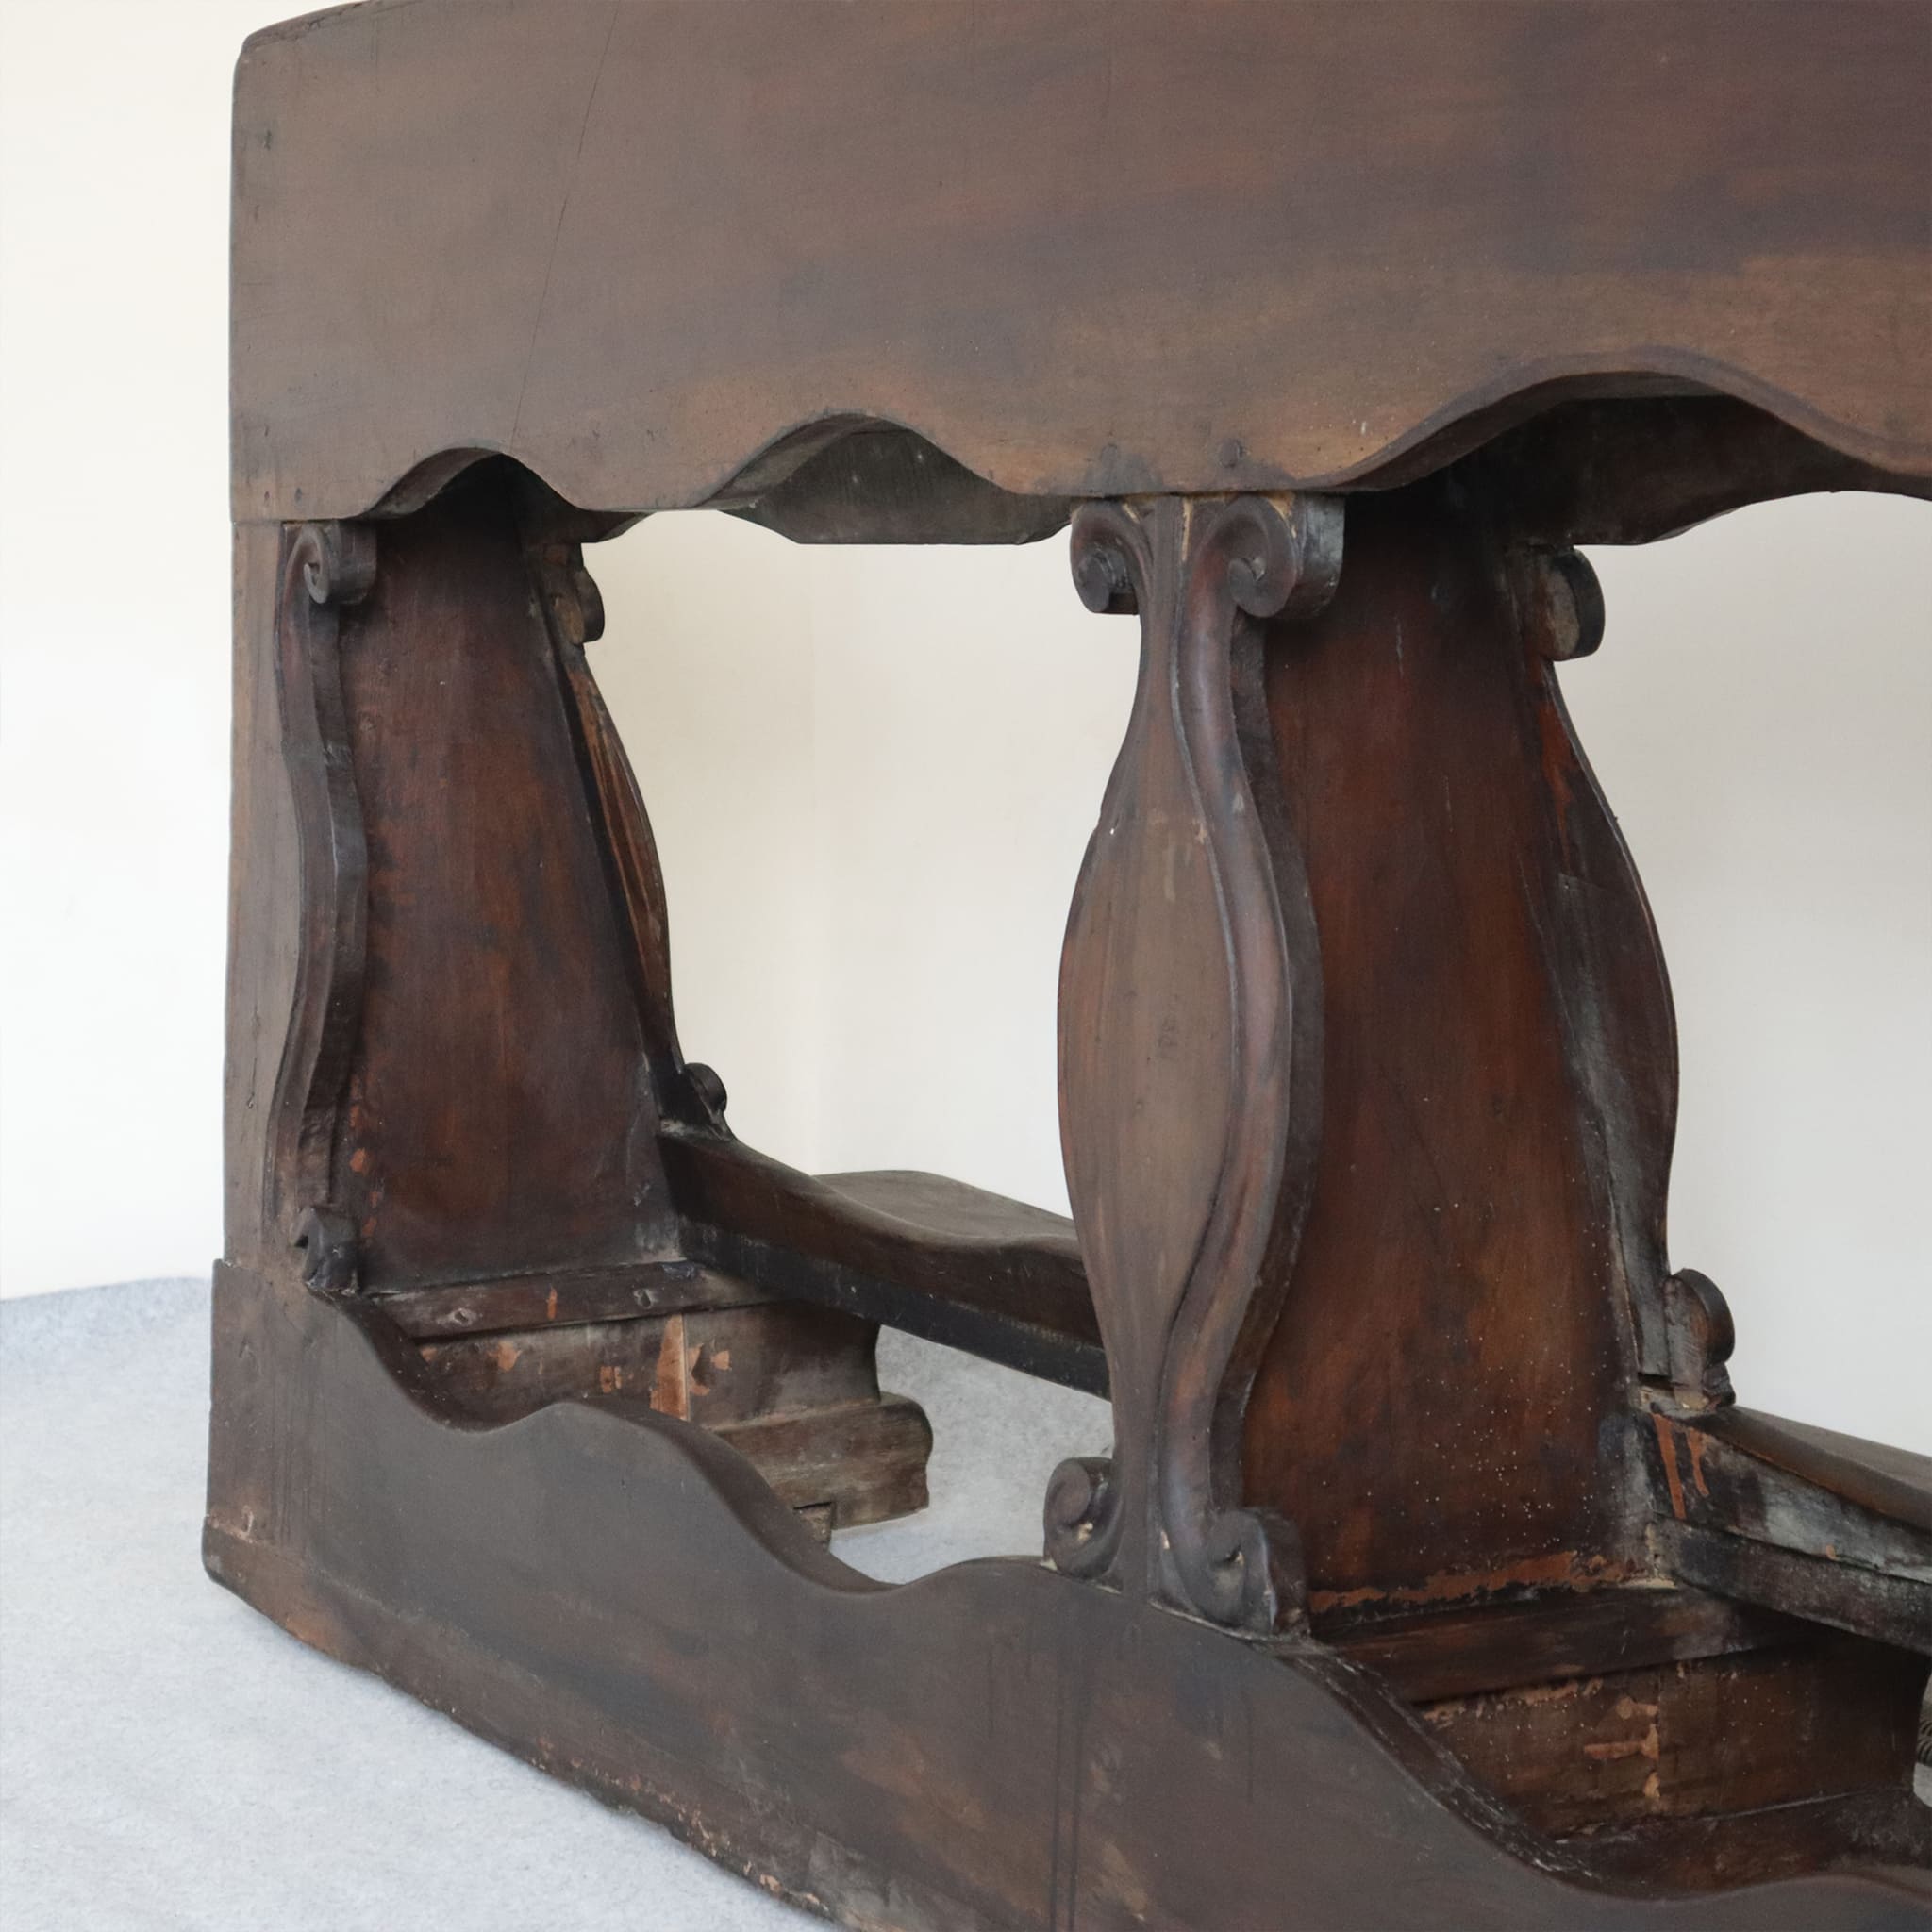 visionidepoca-antique-kneeler-in-solid-walnut-from-18th-century-that-belonged-to-prince-ambrogio-II-caracciolo-detail-view-workmanship-walnut